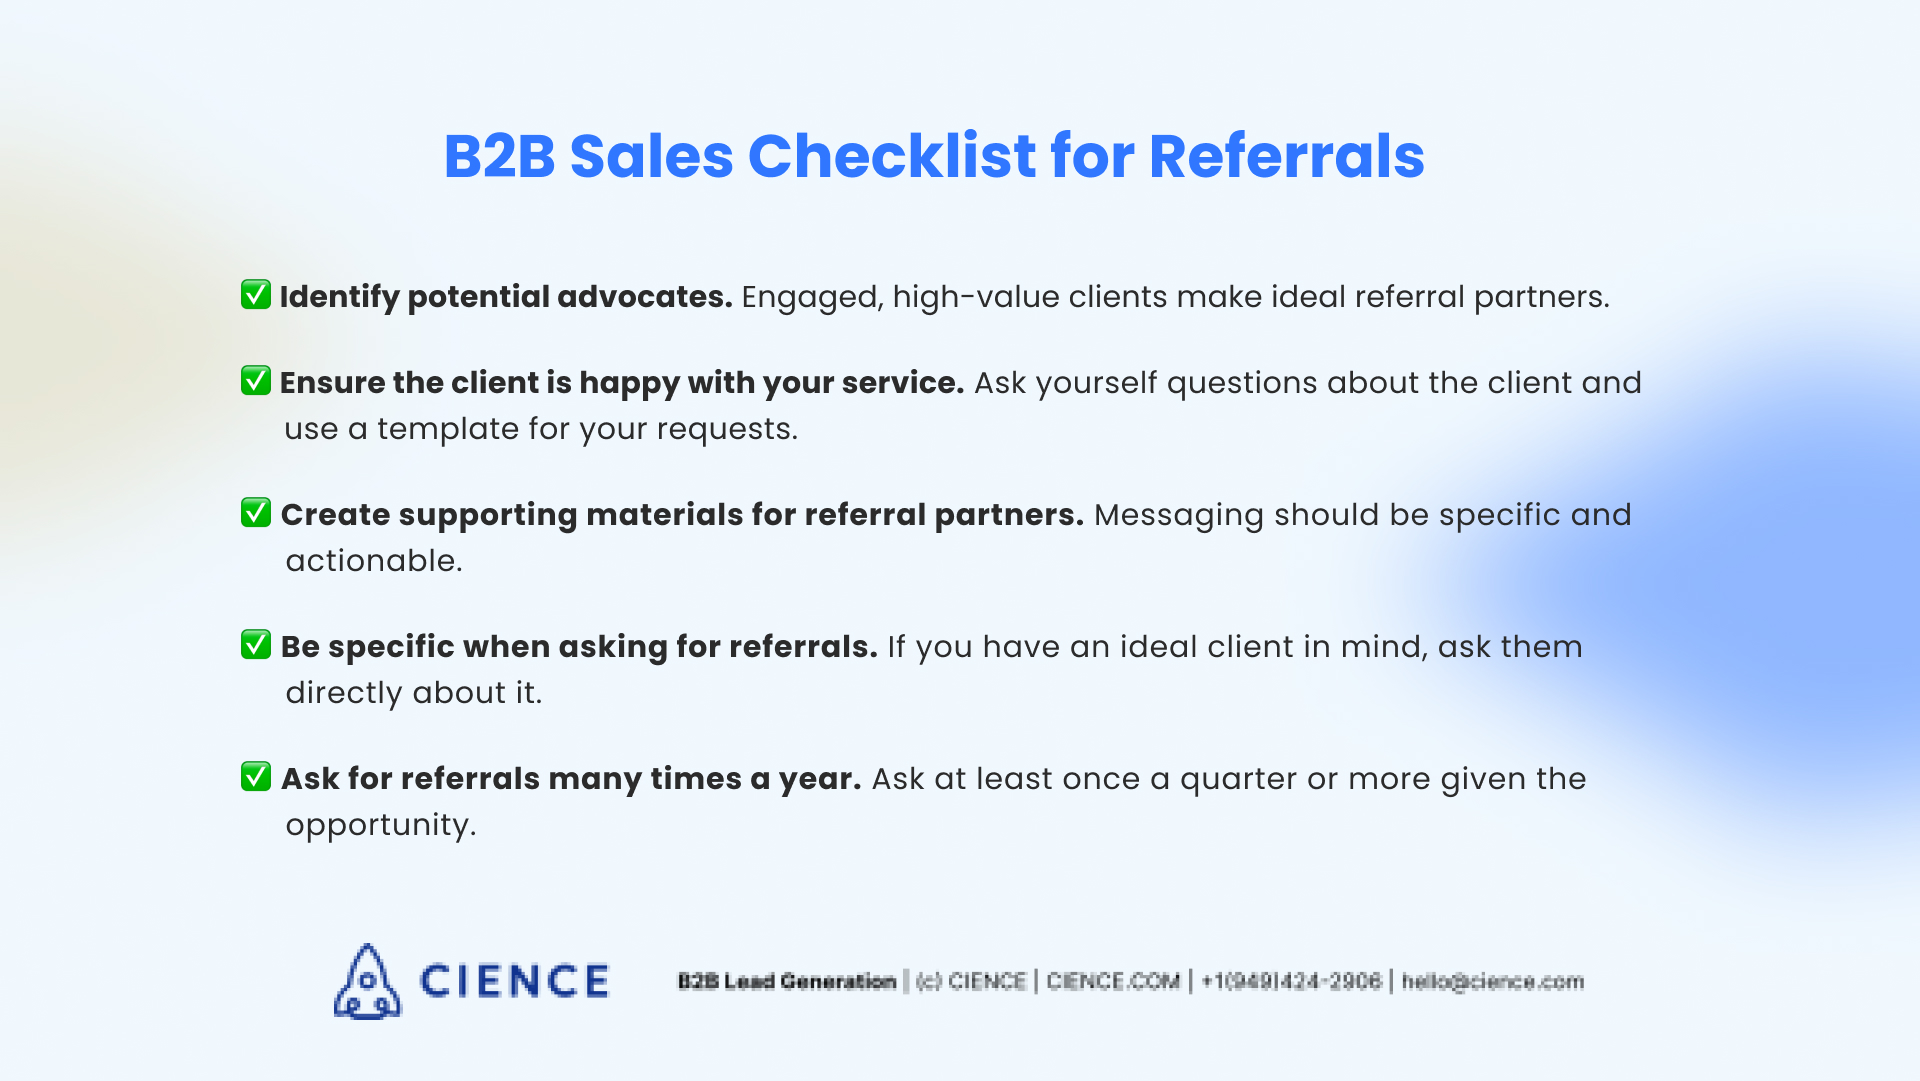 How To Ask for Referrals - Checklist